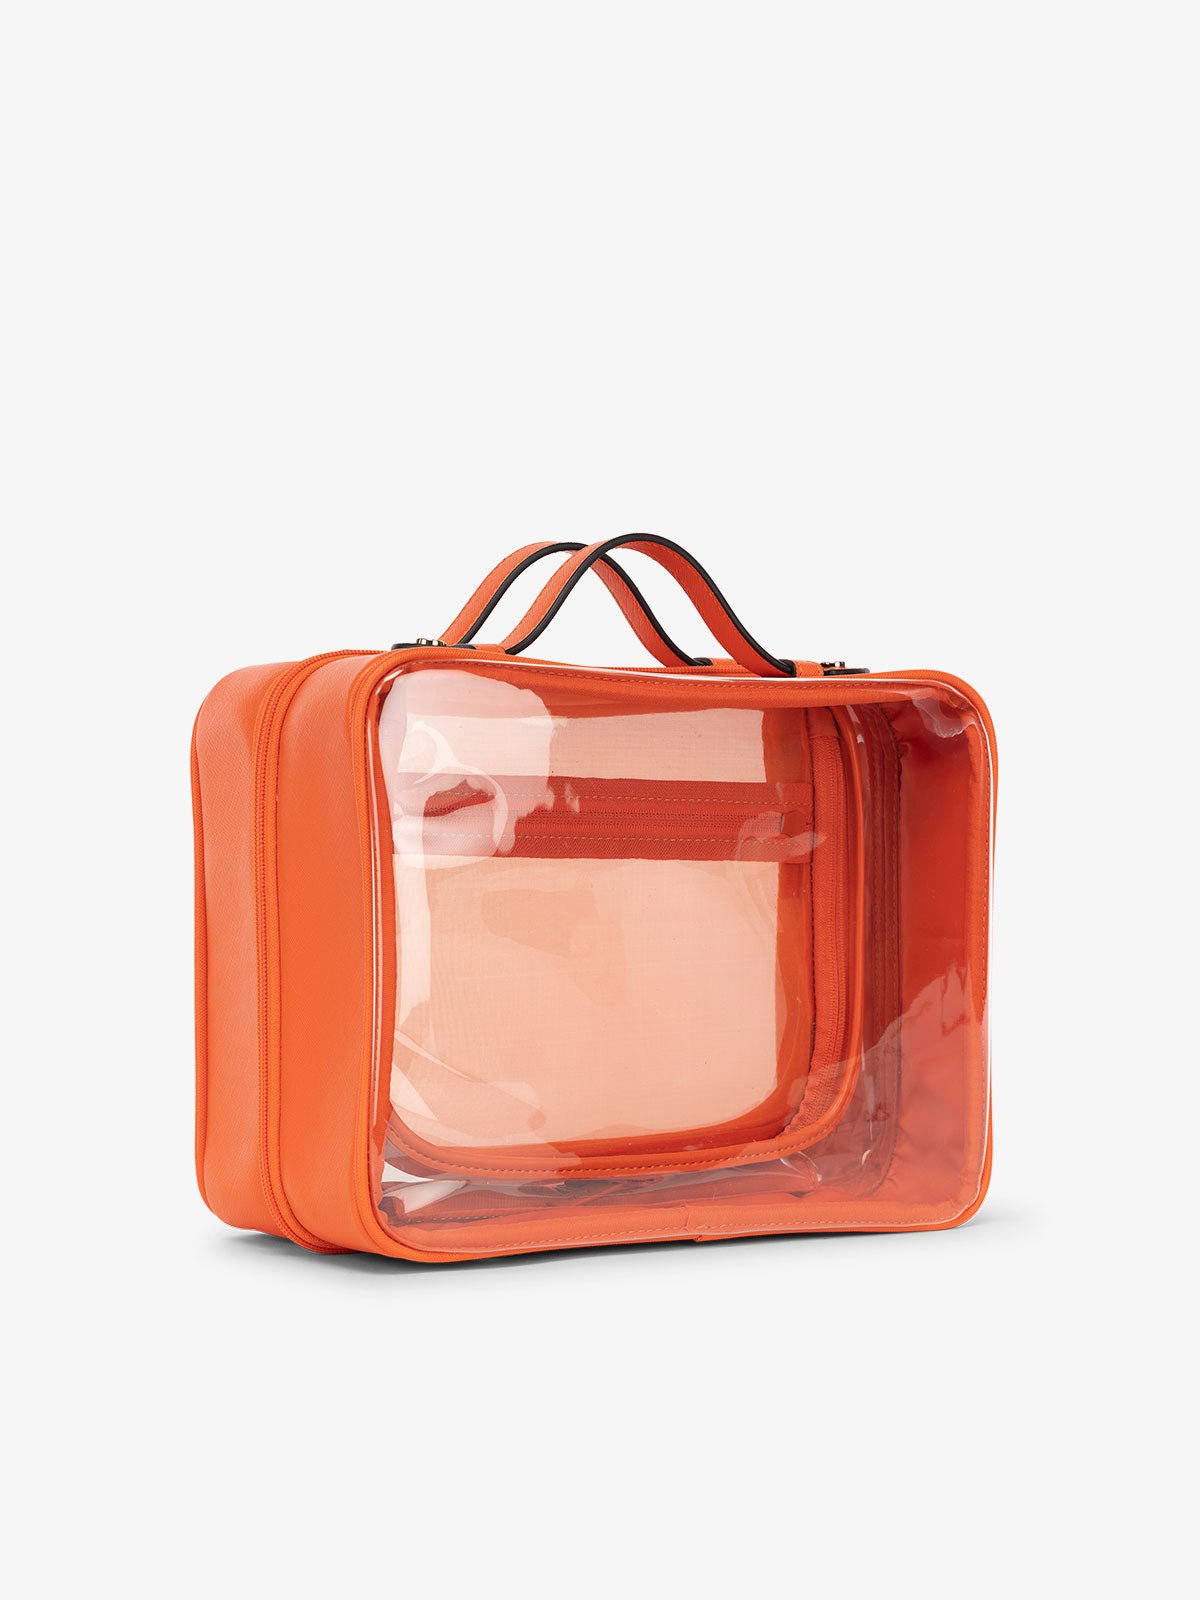 CALPAK large clear skincare bag with multiple zippered compartments in orange